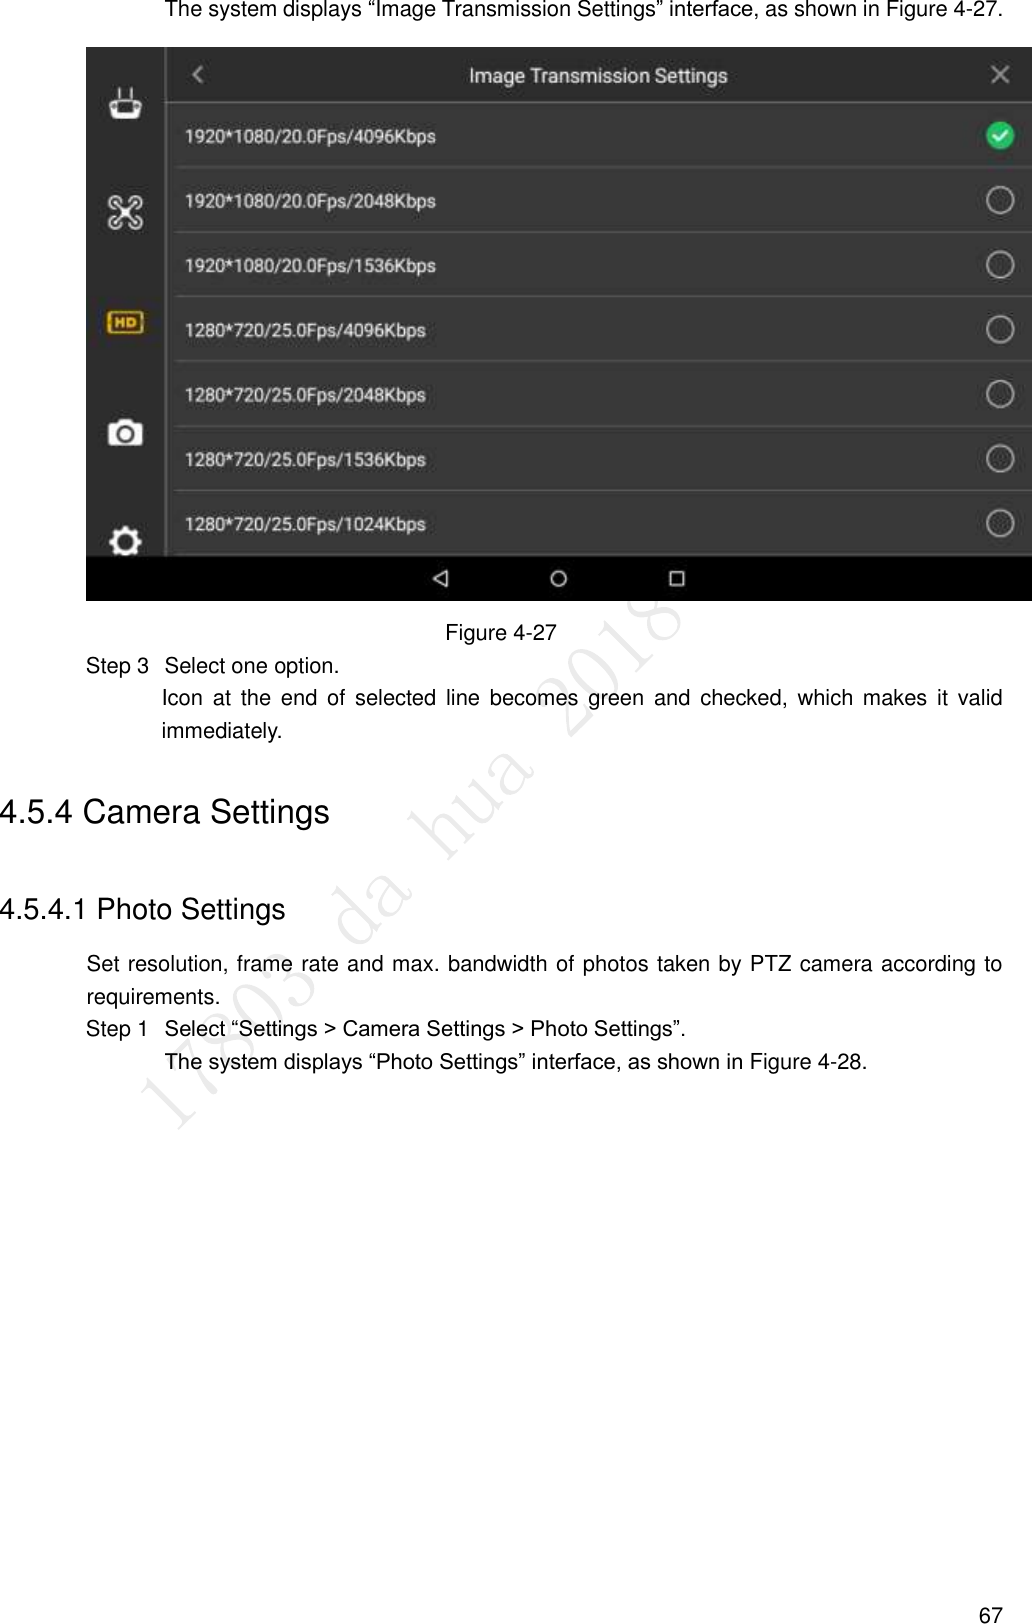  67 The system displays “Image Transmission Settings” interface, as shown in Figure 4-27.  Figure 4-27   Select one option. Step 3Icon  at  the  end  of  selected  line  becomes green and  checked,  which  makes  it  valid immediately. 4.5.4 Camera Settings 4.5.4.1 Photo Settings Set resolution, frame rate and max. bandwidth of photos taken by PTZ camera according to requirements.  Select “Settings &gt; Camera Settings &gt; Photo Settings”. Step 1The system displays “Photo Settings” interface, as shown in Figure 4-28. 